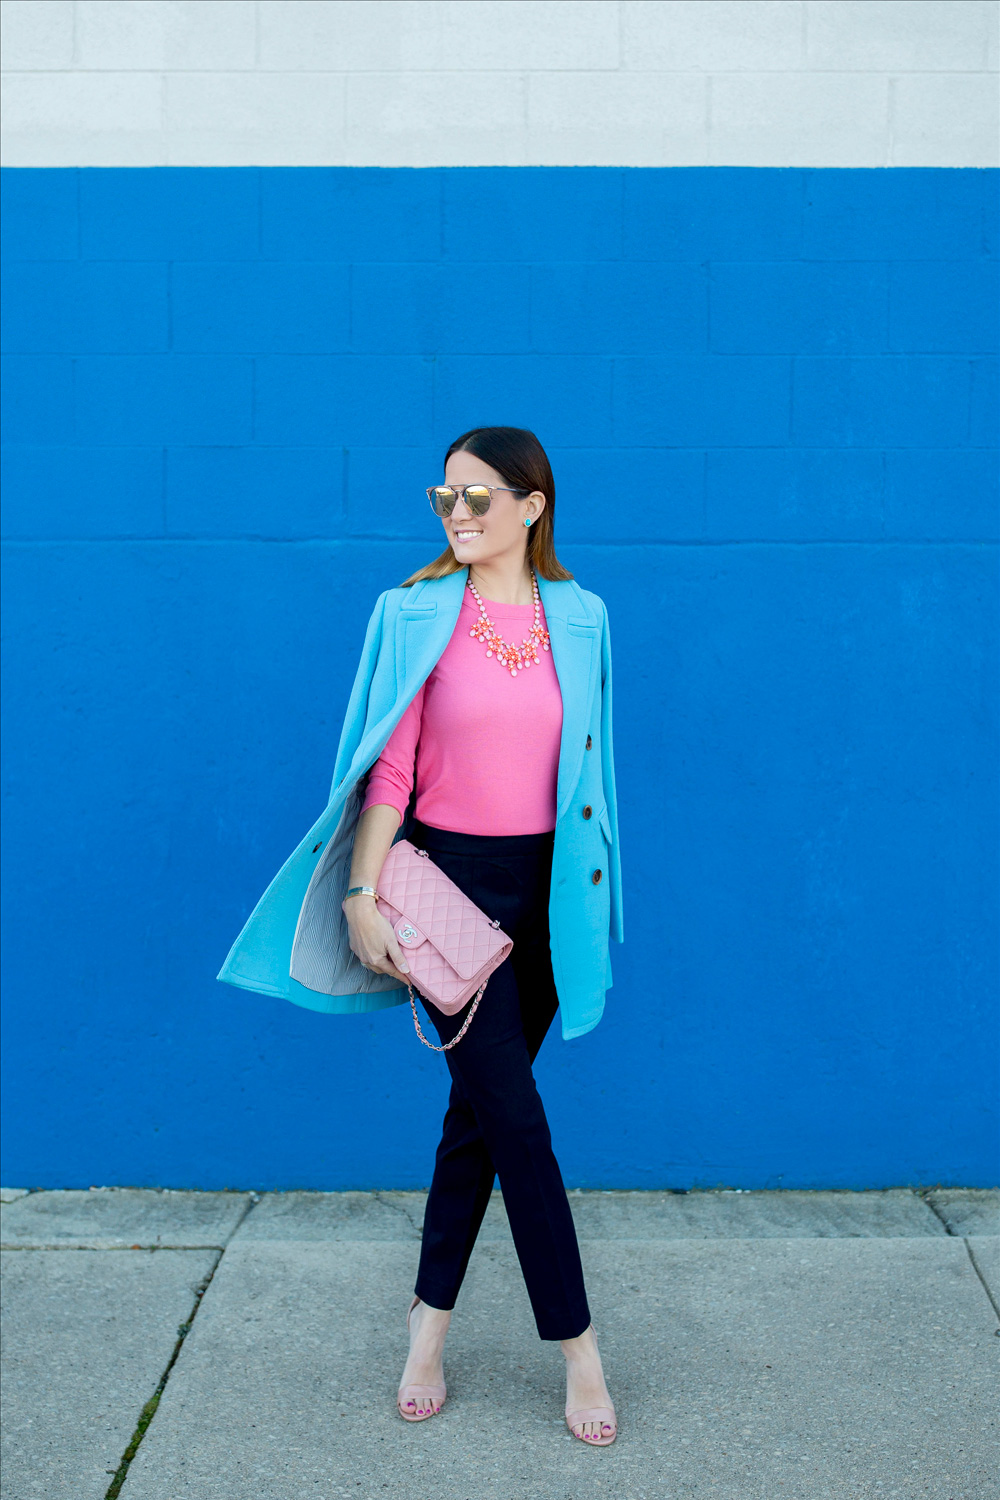 Jennifer Lake Style Charade in J Crew Nordstrom blue coat, pink cashmere sweater, pink Chanel quilted flap bag, and Steve Madden Carrson sandals at a blue wall in Chicago